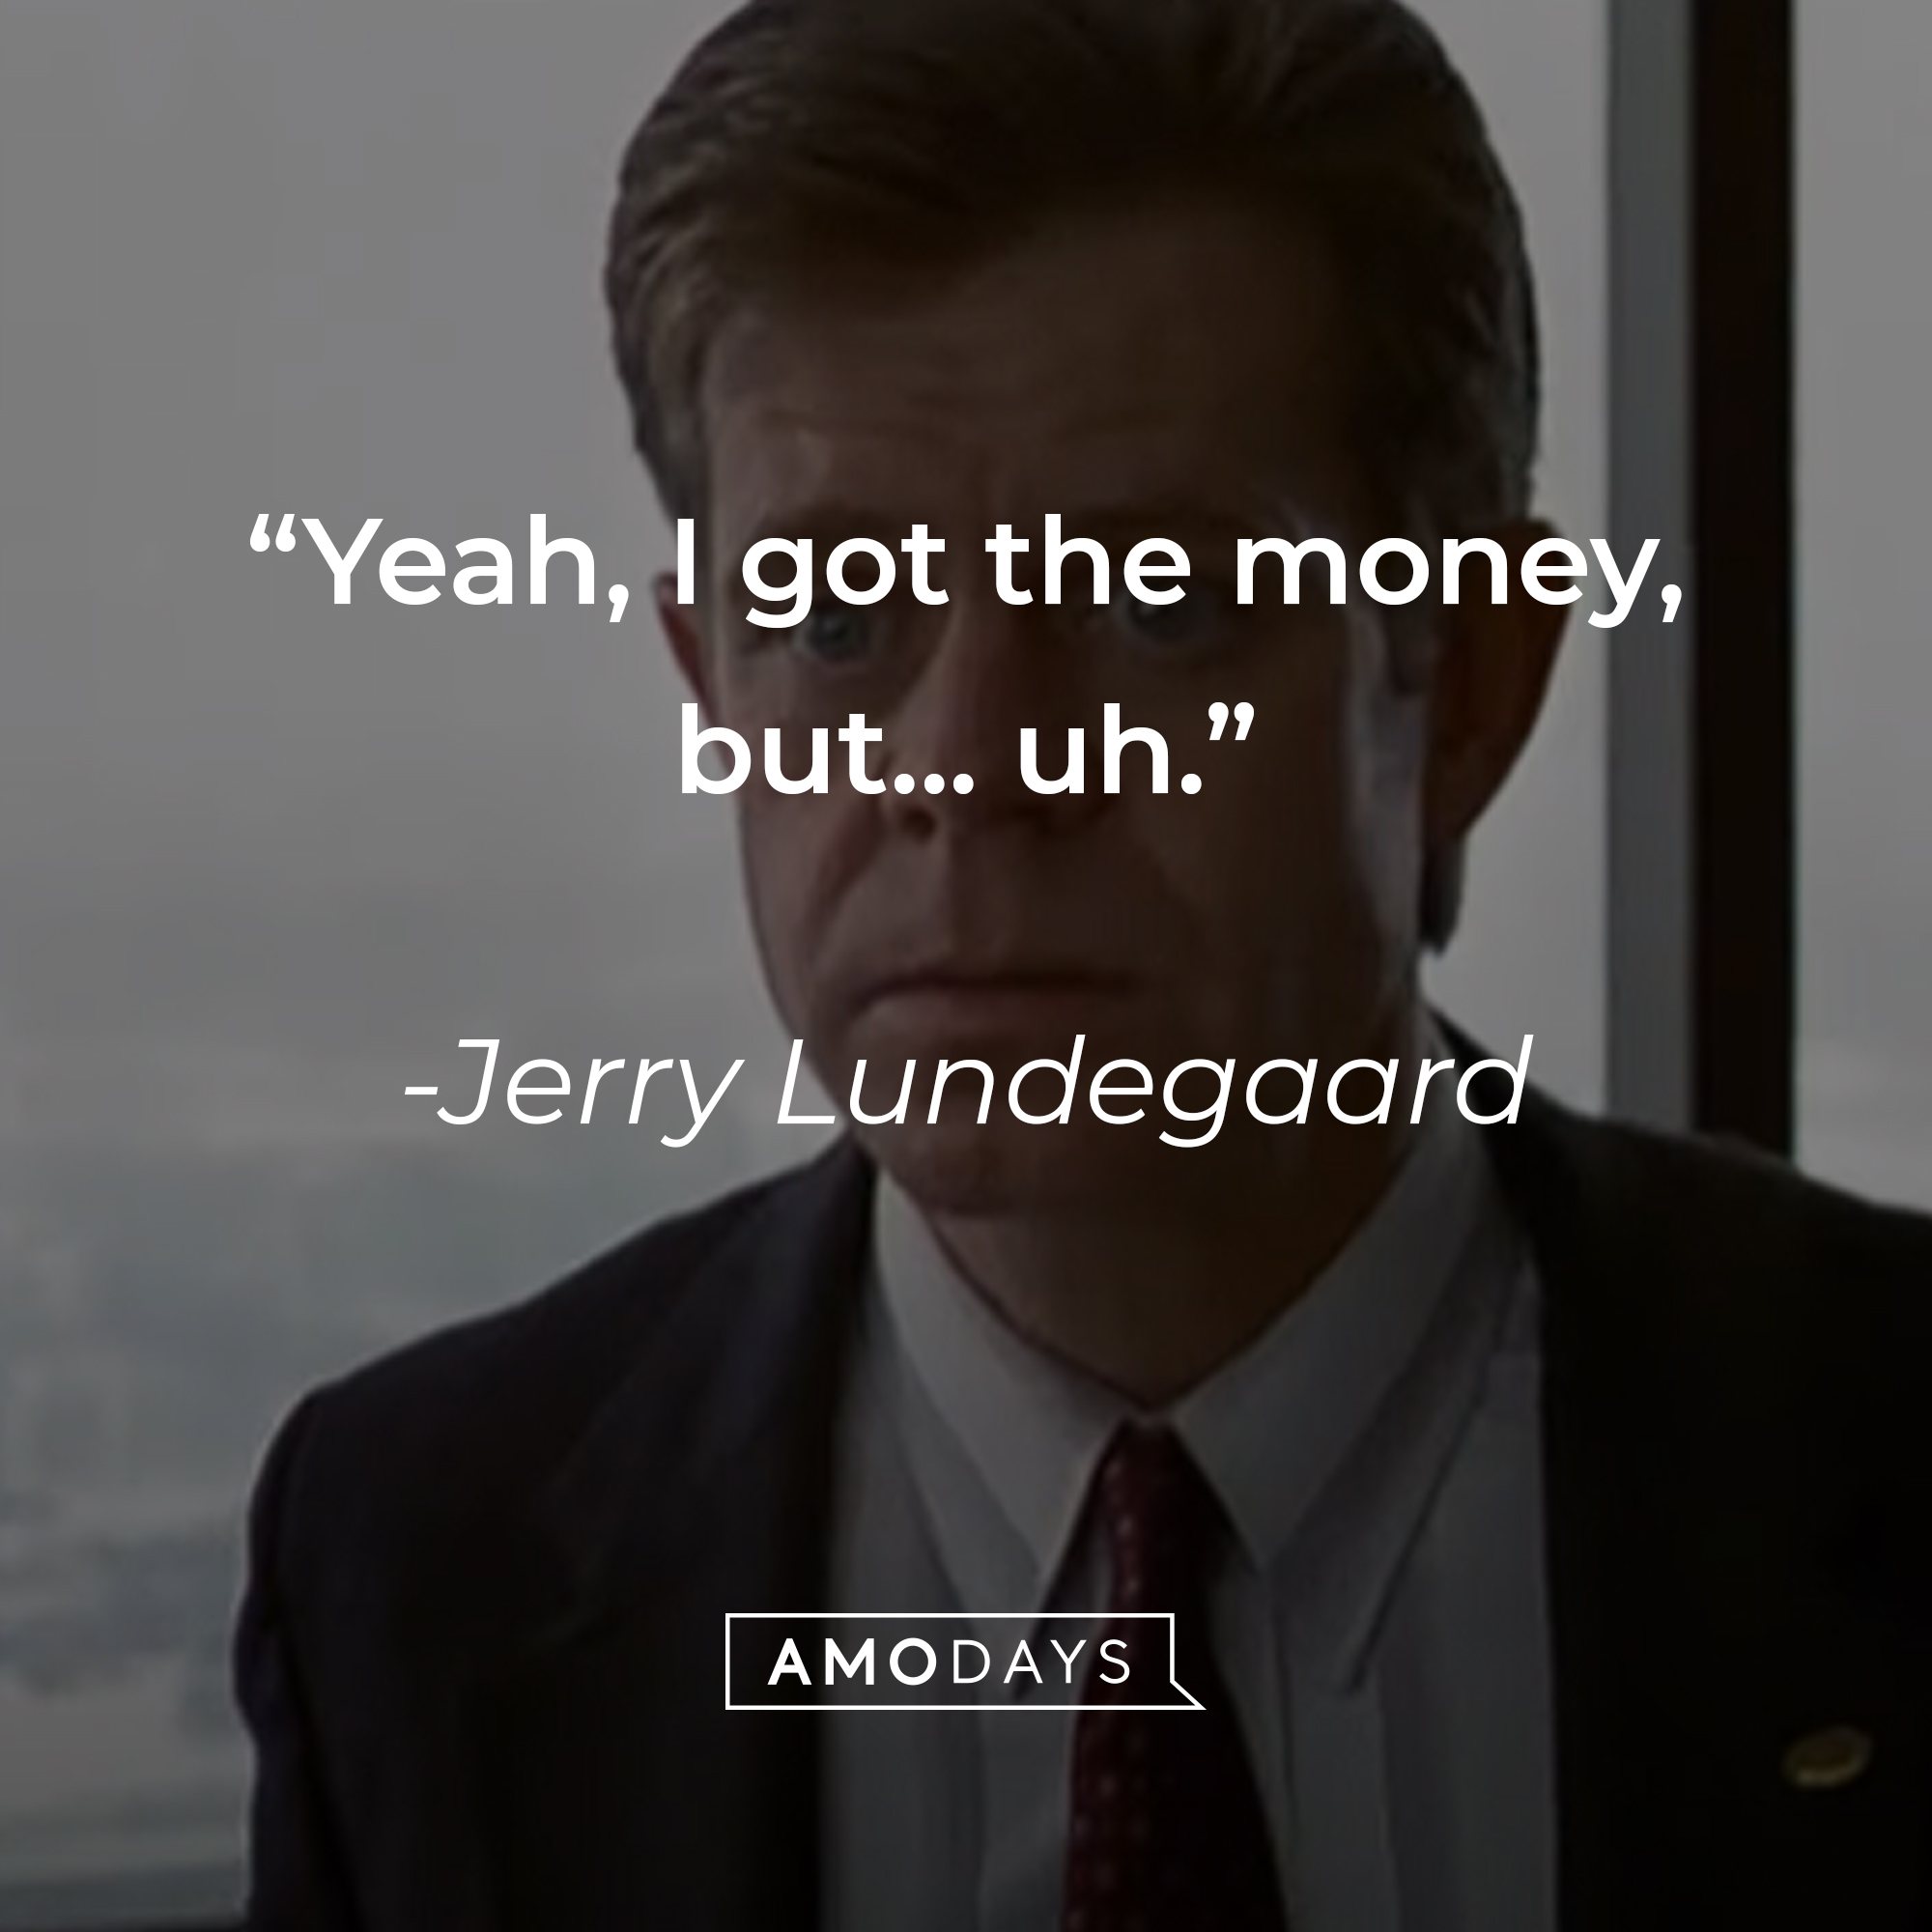 Jerry Lundegaard's quote: “Yeah, I got the money, but... uh." | Source: youtube.com/MGMStudios